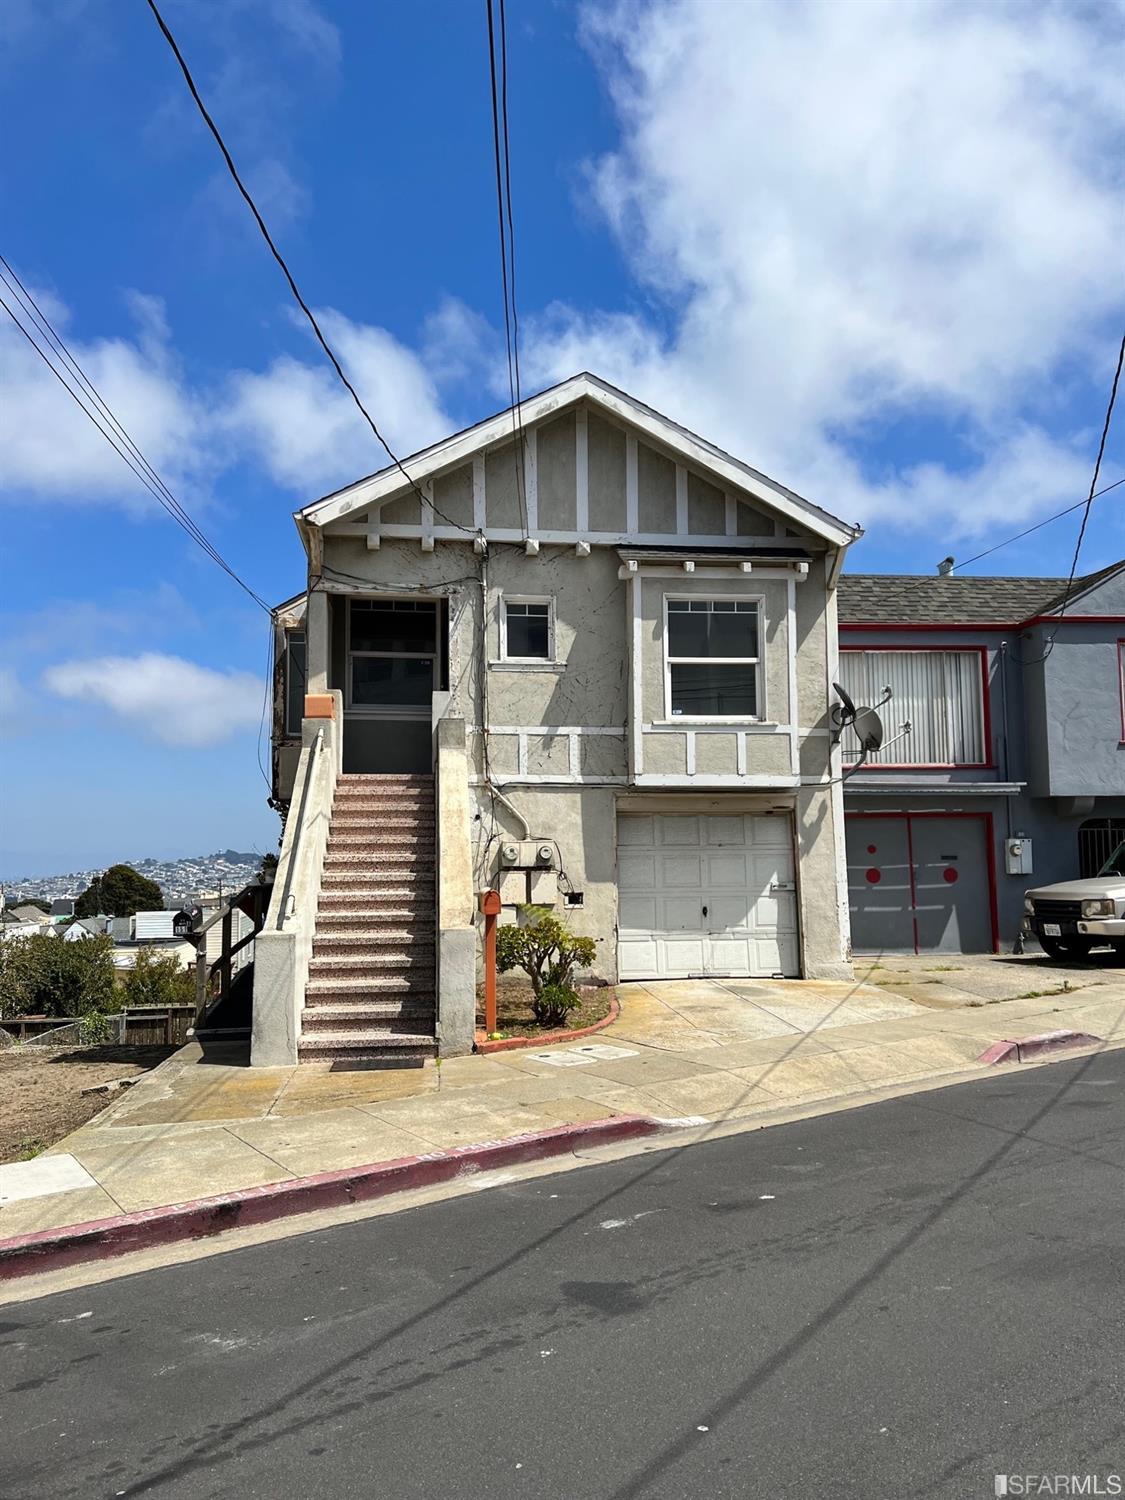 Photo of 151 Wellington Ave in Daly City, CA